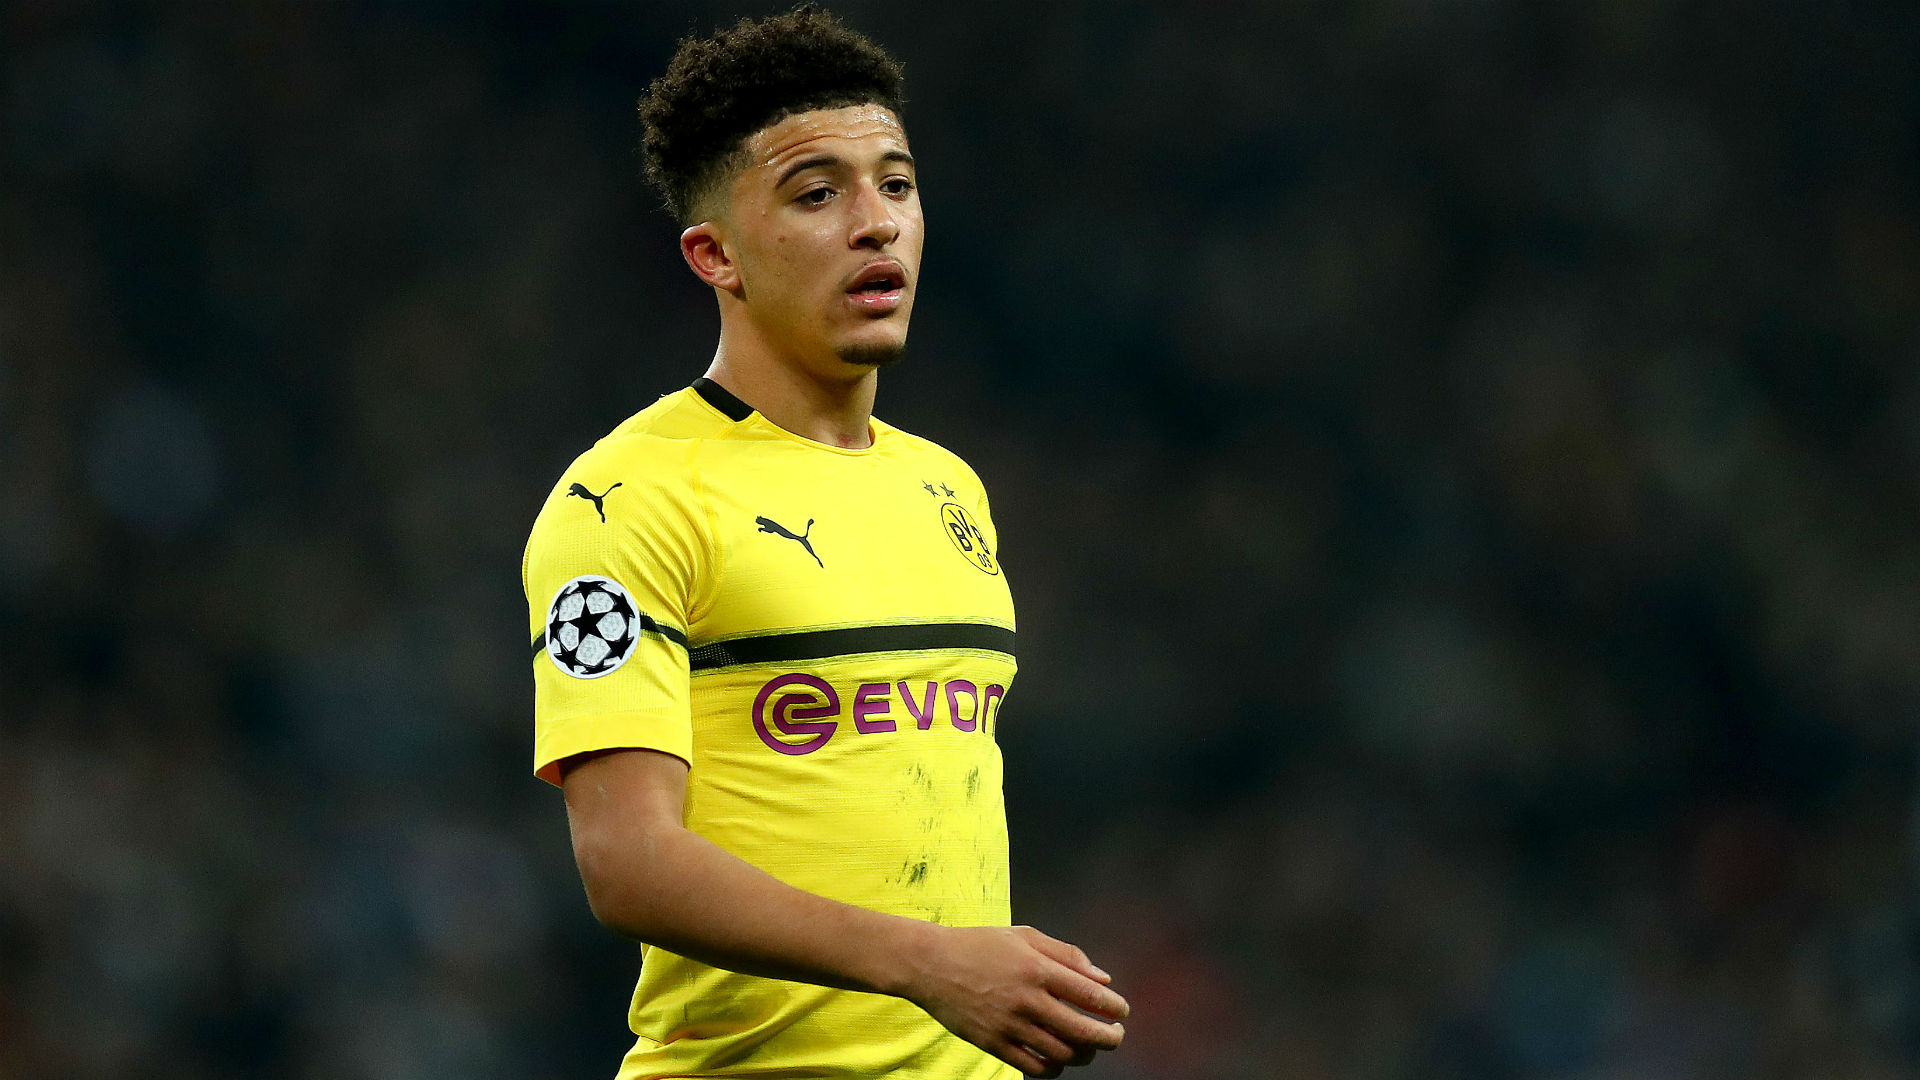 Manchester United are said to be targeting Borussia Dortmund star Jadon Sancho, but Michael Zorc dismissed the speculation.